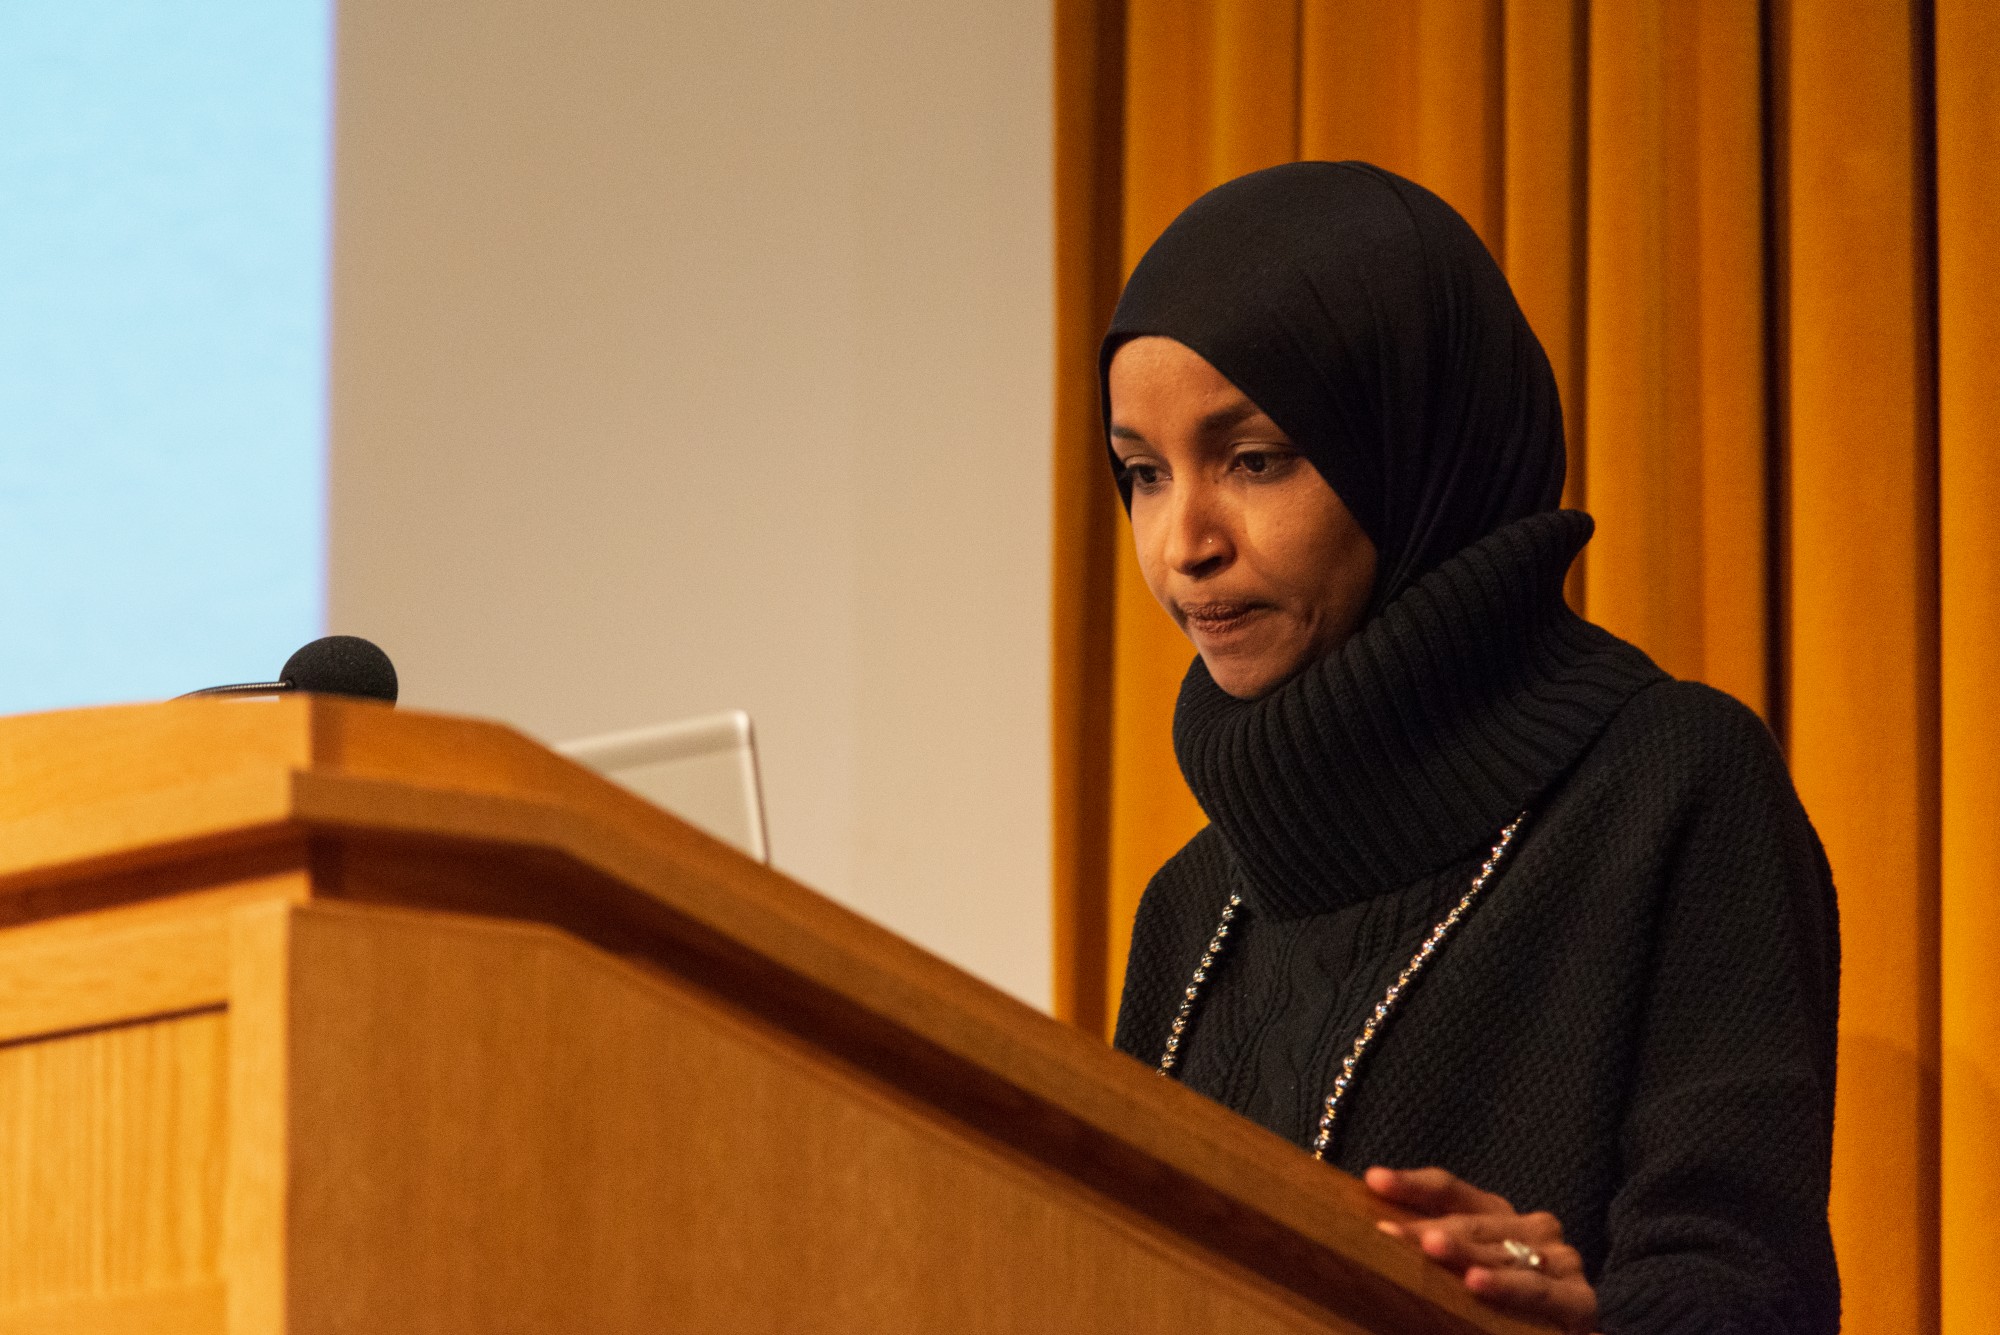 Rep. Ilhan Omar addresses an audience in Cowles Auditorium on Tuesday, Feb. 18. The event centered around her “Pathway to Peace”, a package of seven bills which aim to reorient U.S. foreign policy.